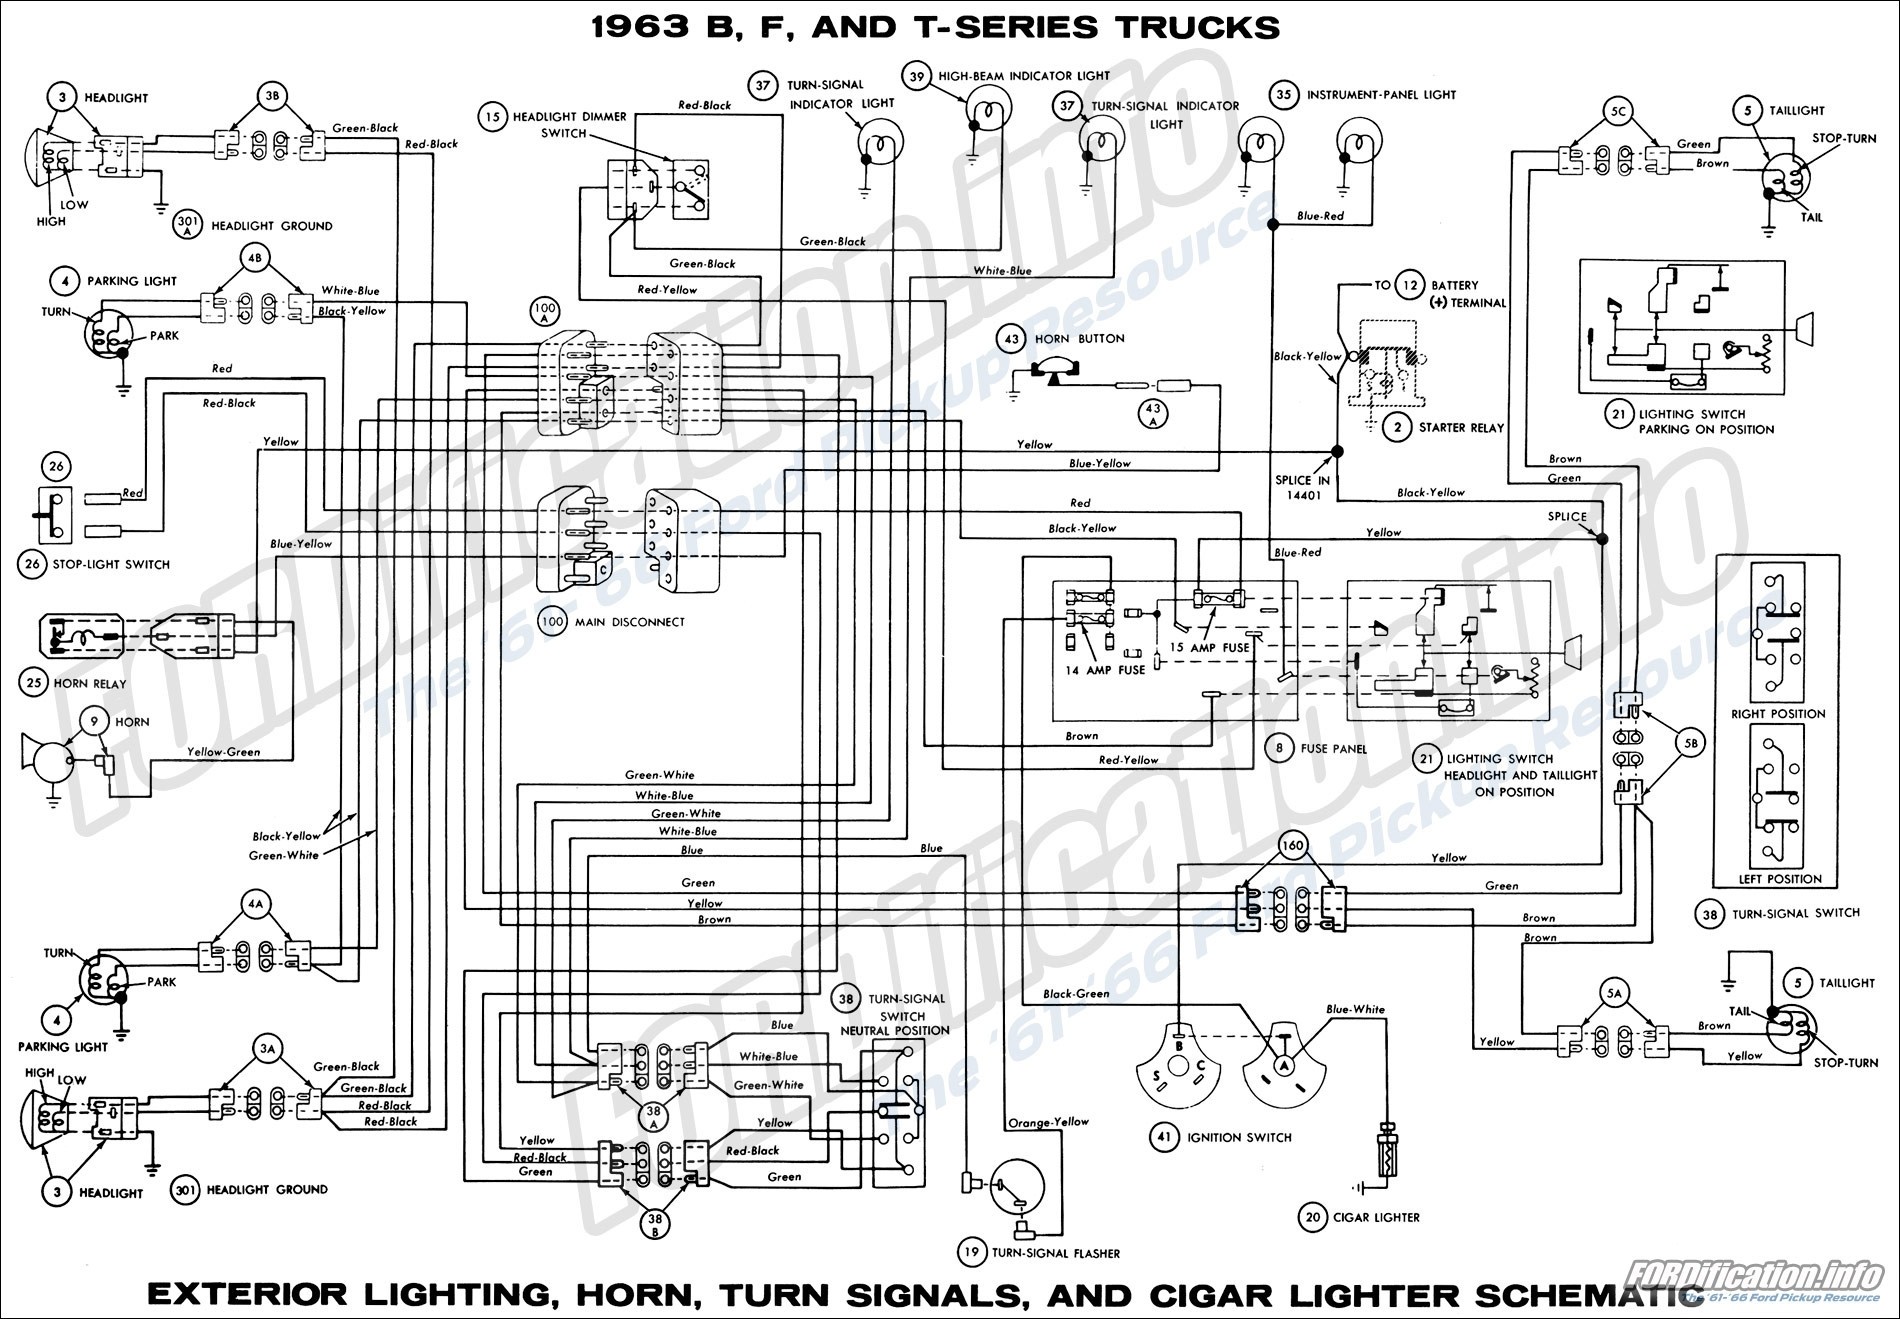 Wire Diagram for Tail Lights Wiring Diagrams for Turn Signal Best Stop Turn Tail Light Wiring Of Wire Diagram for Tail Lights